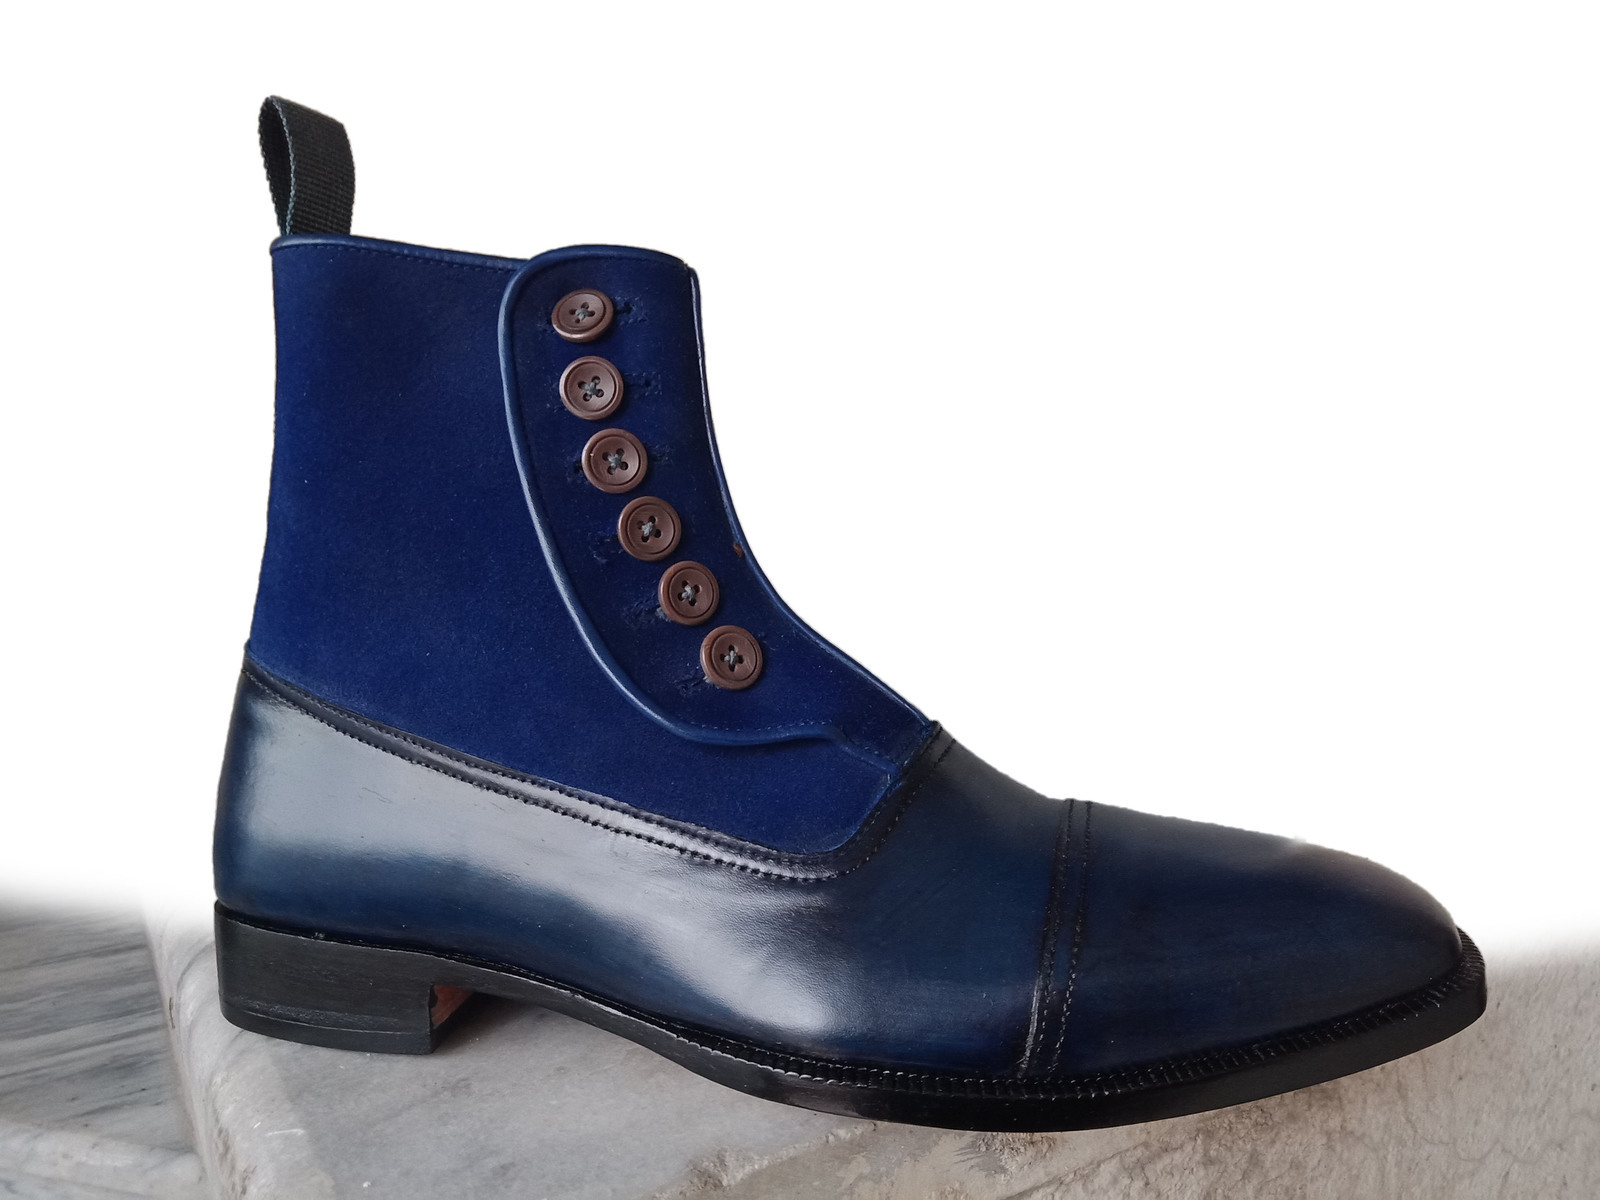 NEW Handmade Mens Navy Blue Suede Leather boot, Men's Cap Toe Button Ankle High